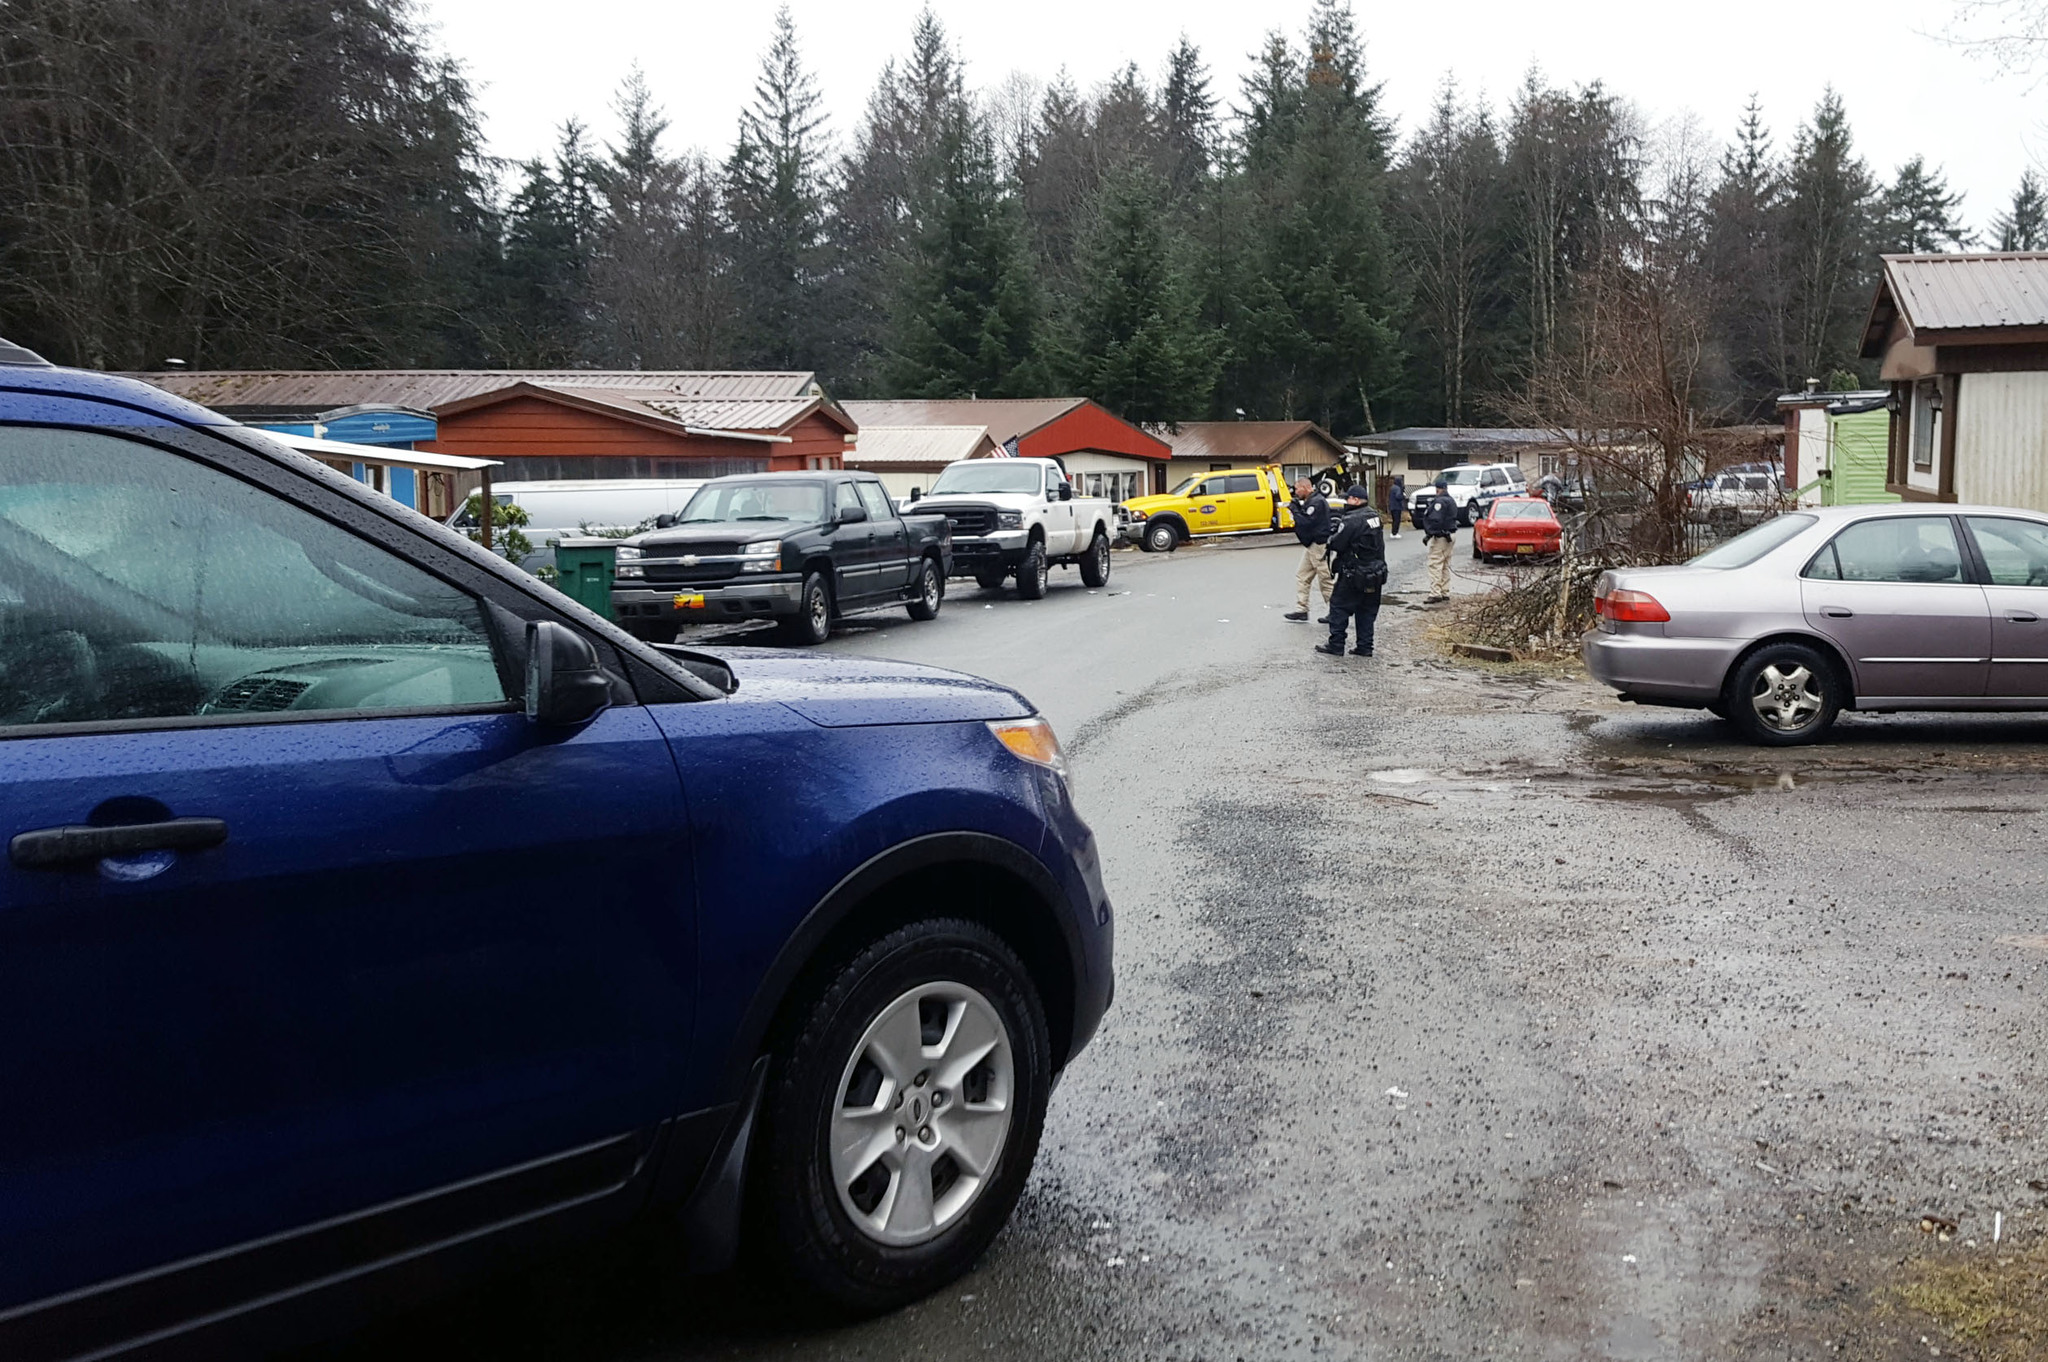 Juneau Police Department investigators at the scene of a shooting incident at Switzer Mobile Home Park Wednesday morning. (Liz Kellar | Juneau Empire)